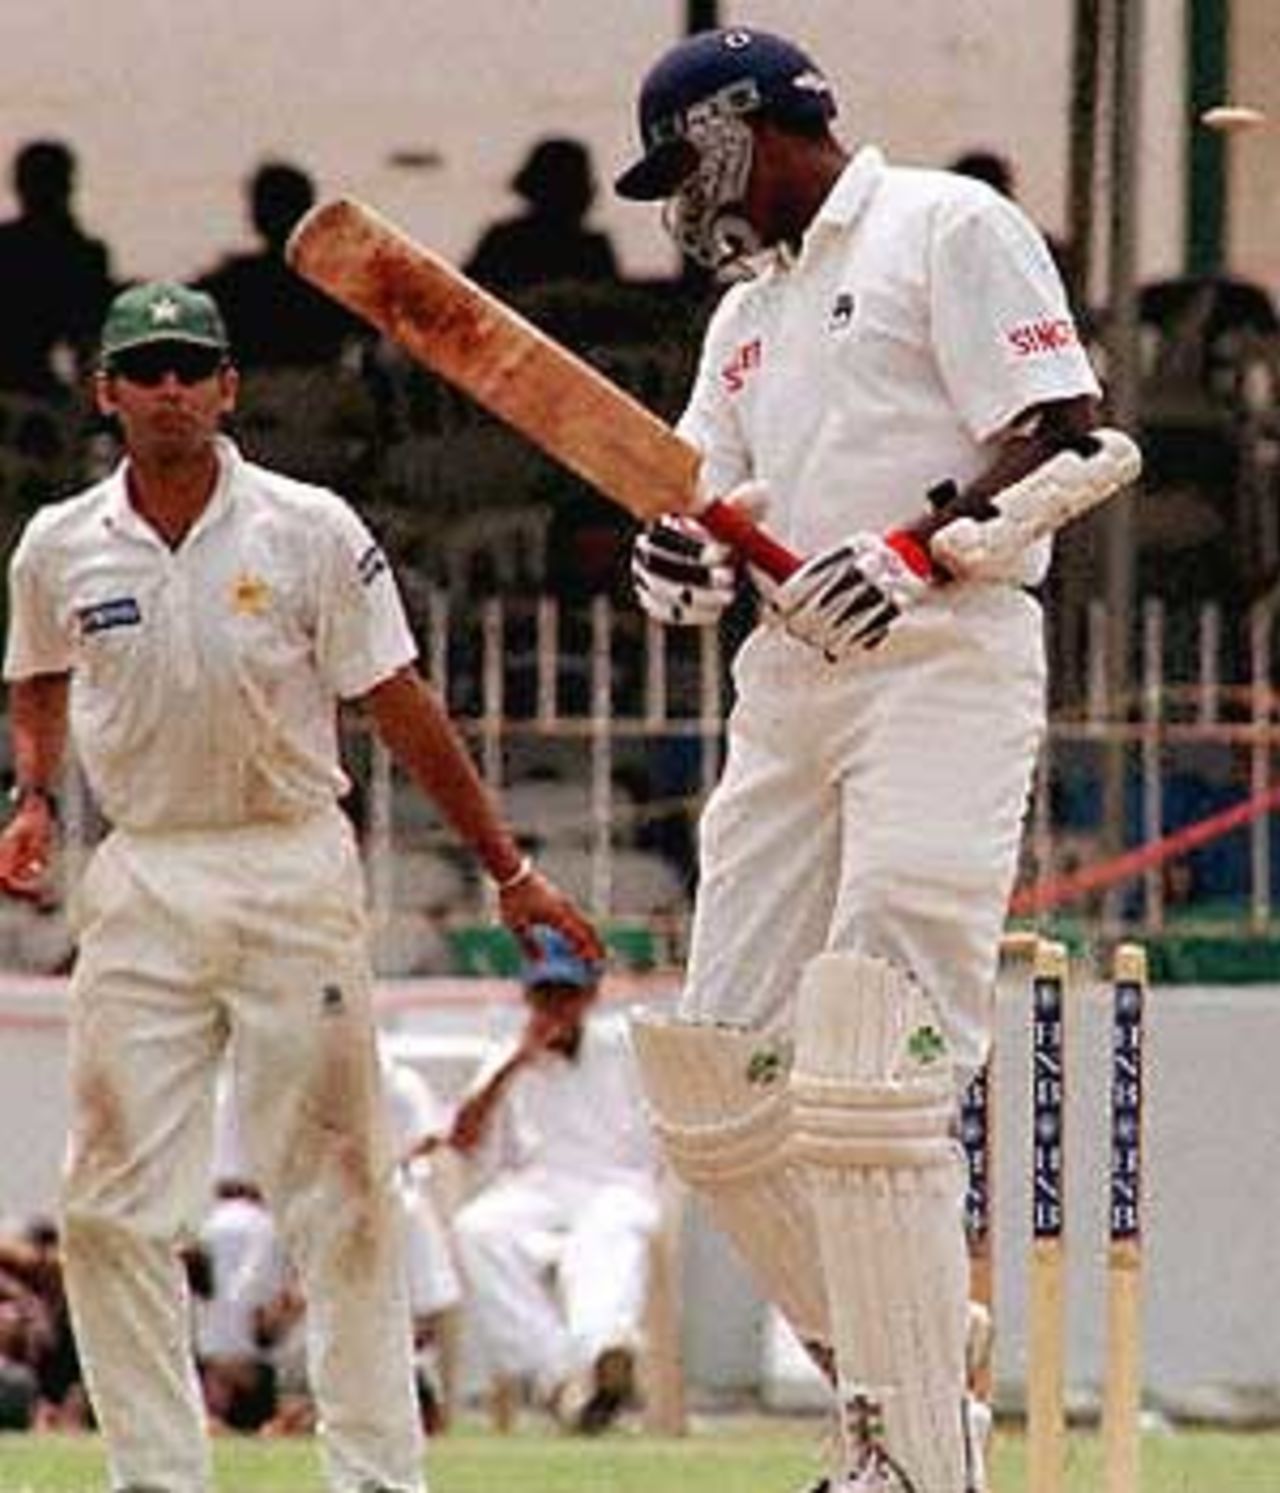 Sri Lanka's RD Fernando looks back as his bails fly off the bowling of Pakistan's Wasim Akram on the fourth day of their first Test at the Sinhalese sports club grounds in the Sri Lankan capital. Pakistan won by five wickets with a full day's play left and Akram (not in the picture) was named man of the match. Pakistan in Sri Lanka, 1999/00, 1st Test, Sri Lanka v Pakistan, Sinhalese Sports Club Ground, Colombo 14-18 June 2000 (Day 4).